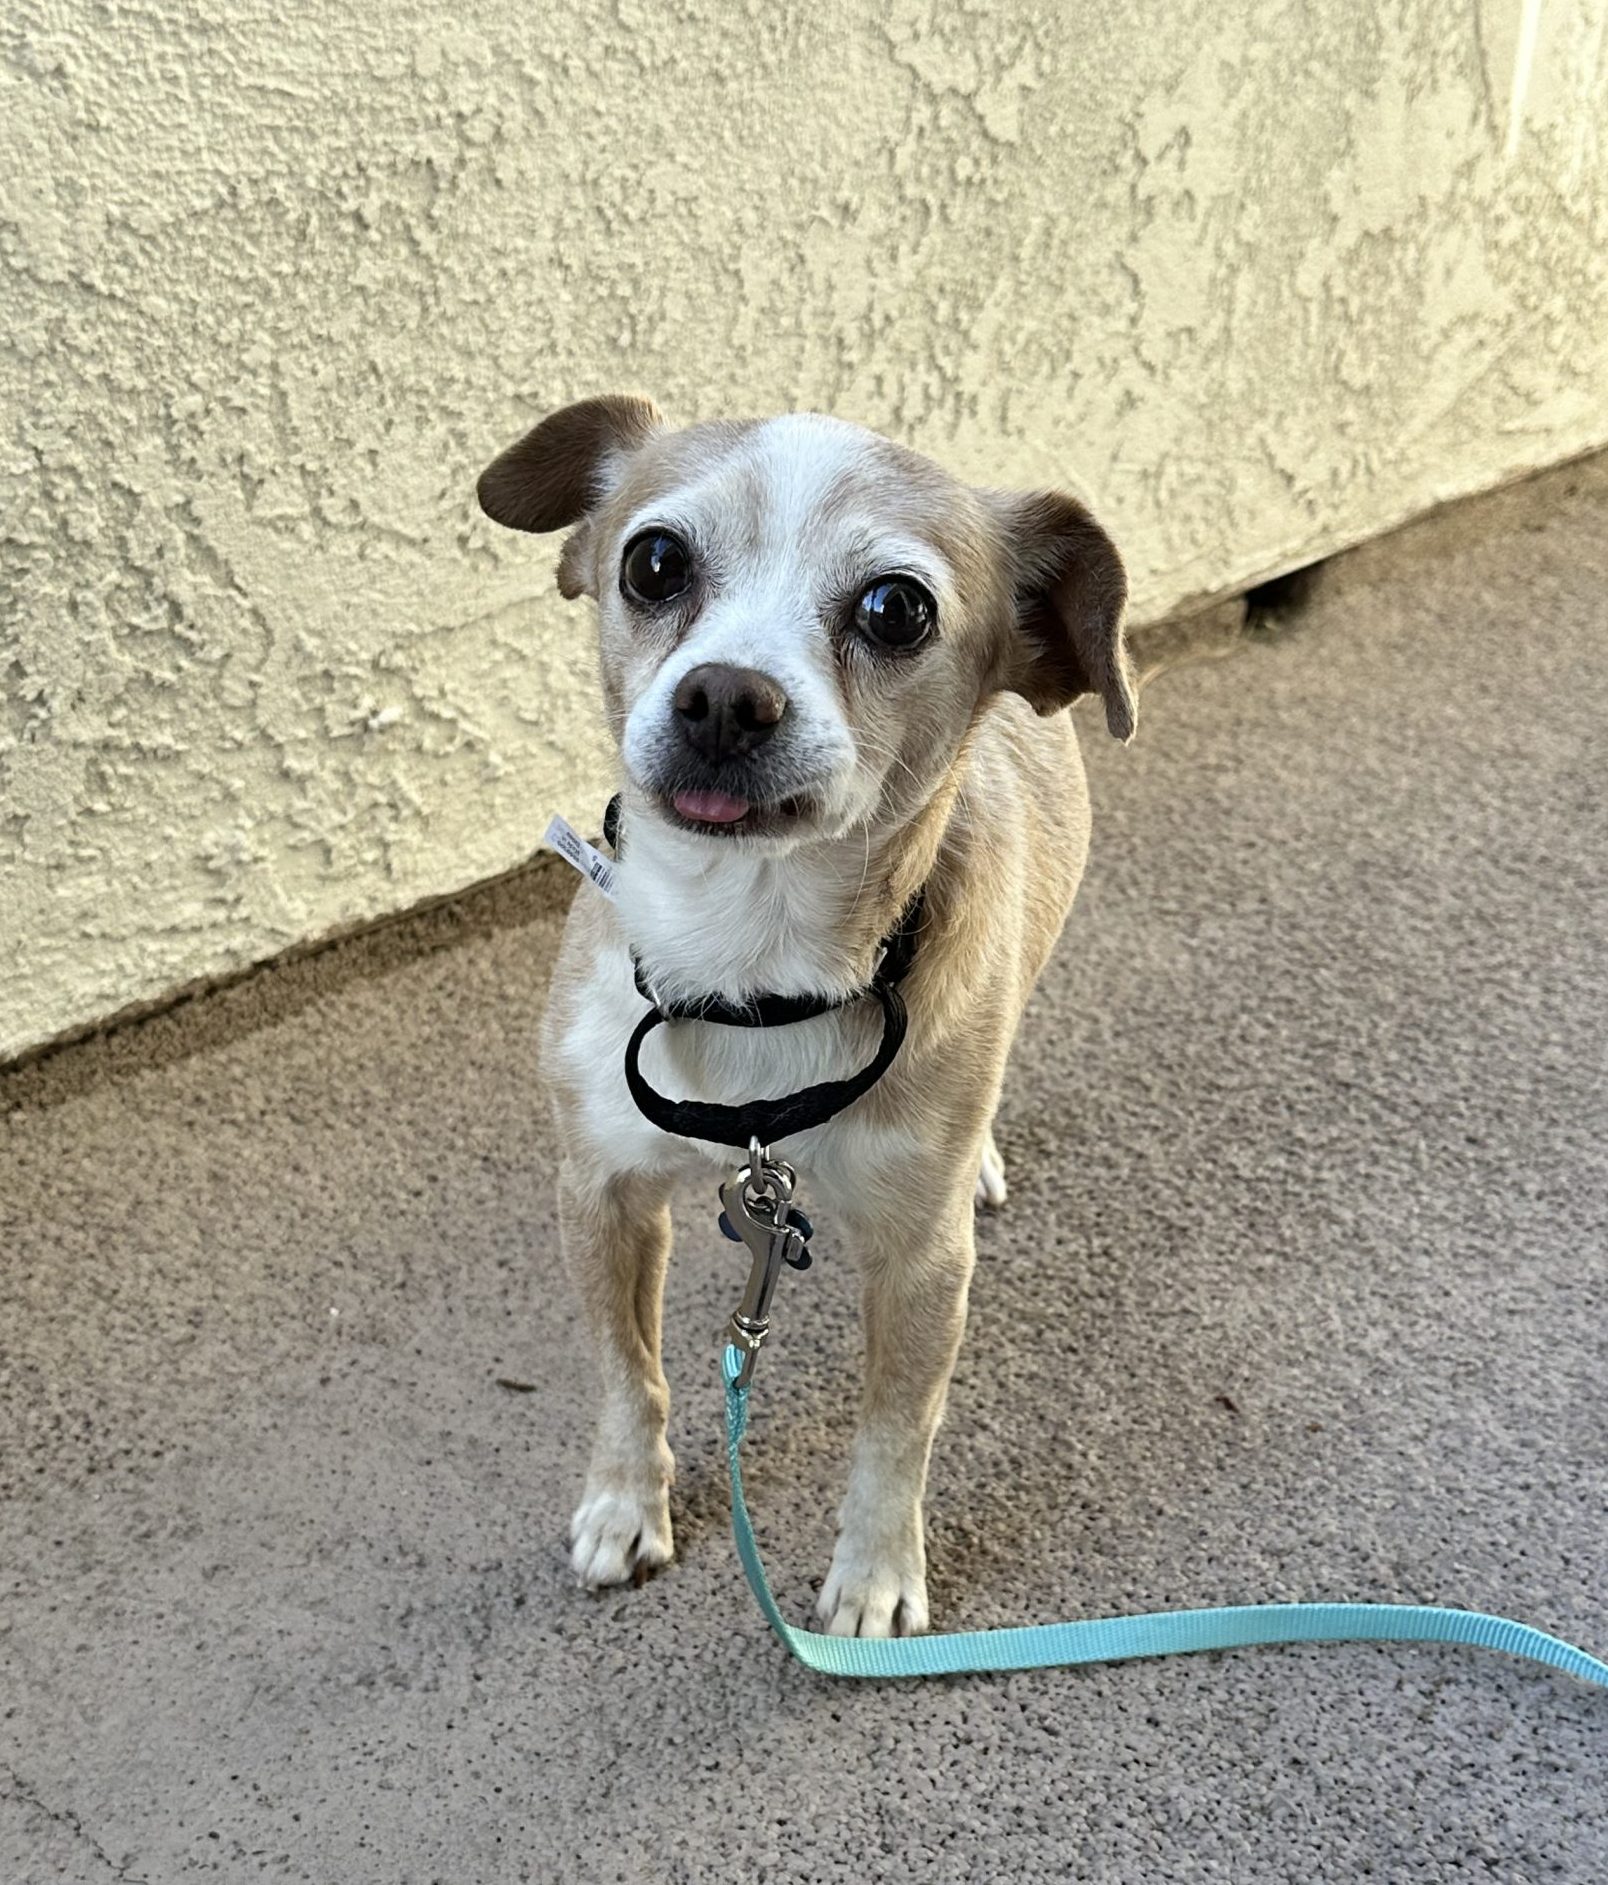 Small senior dog standing on a patio